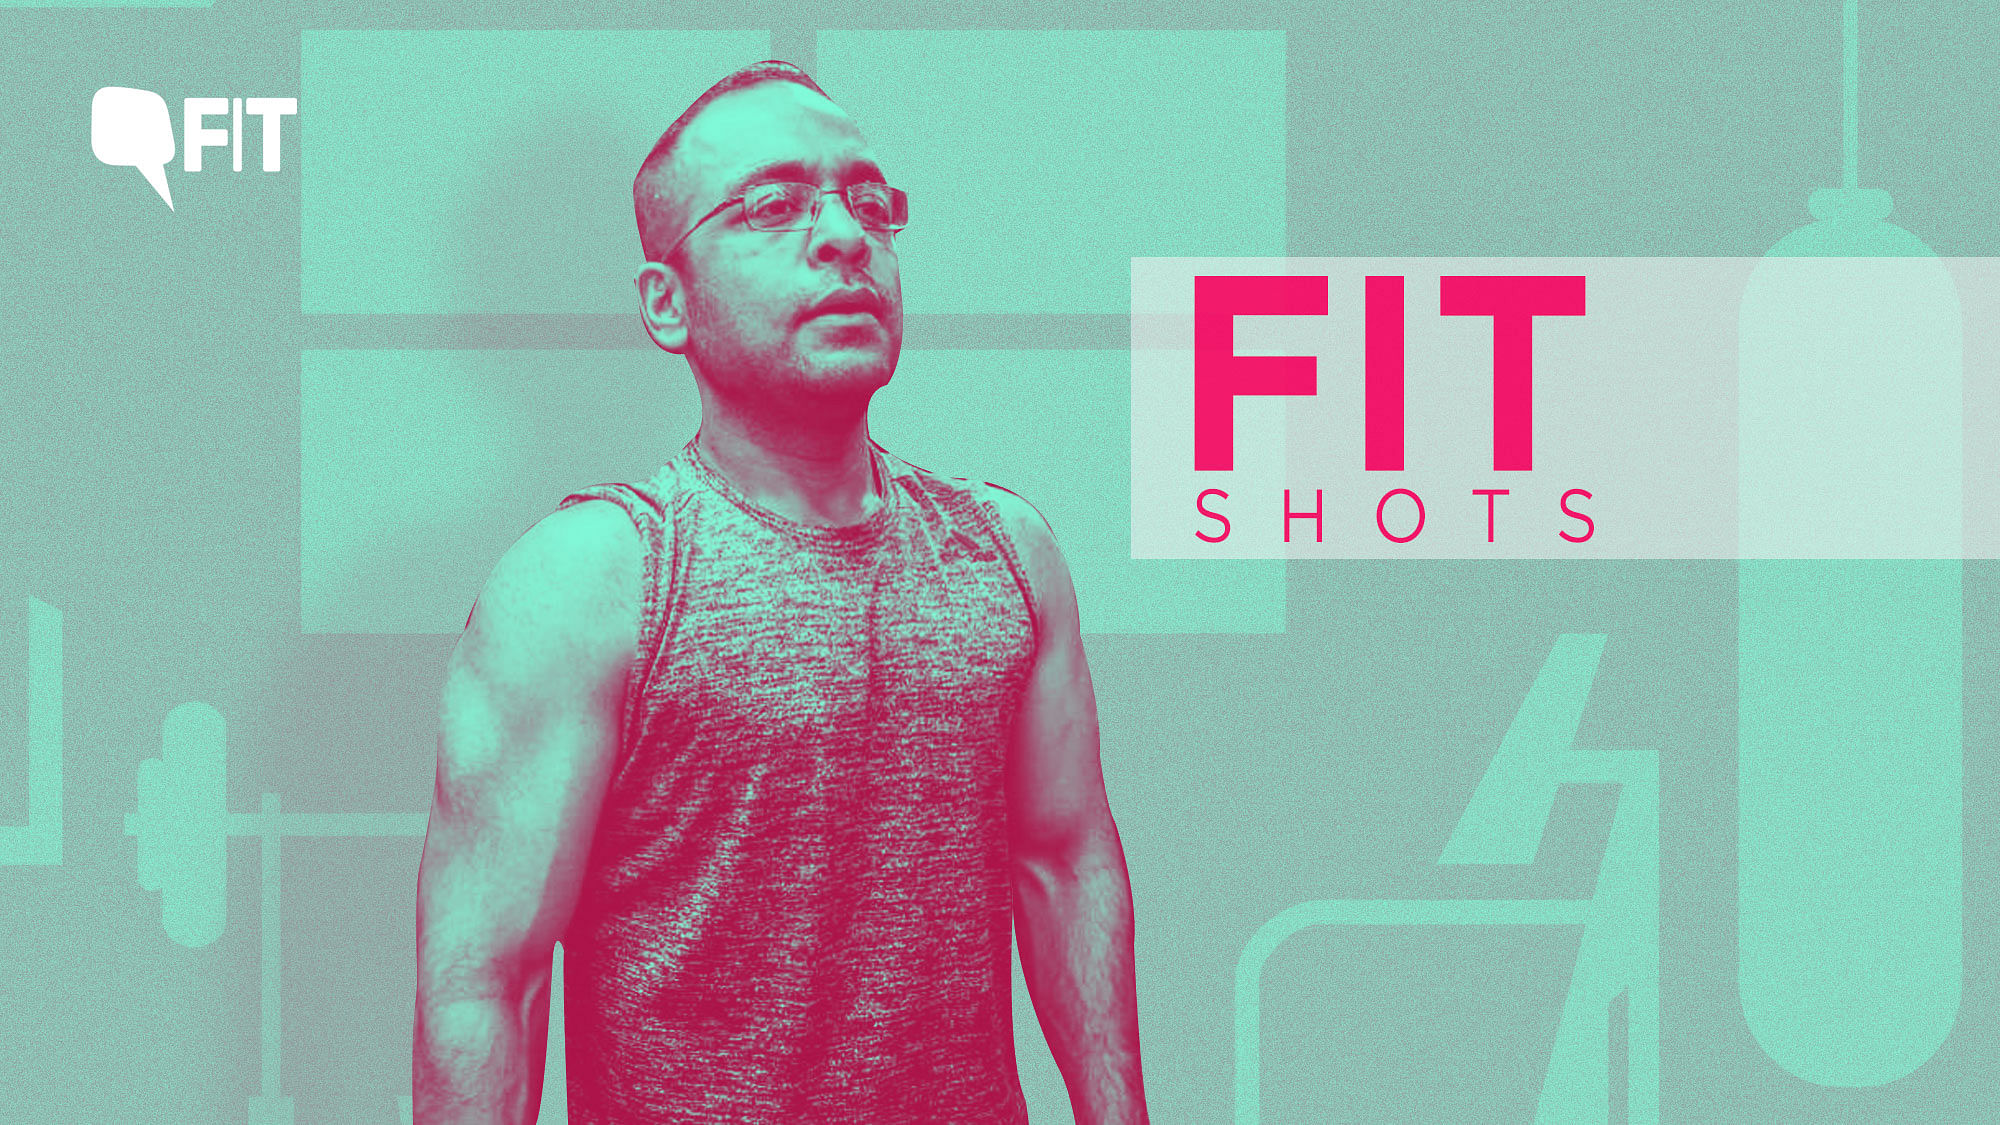 FITShots is a bi-monthly column that shares some real no-nonsense fitness and health advice